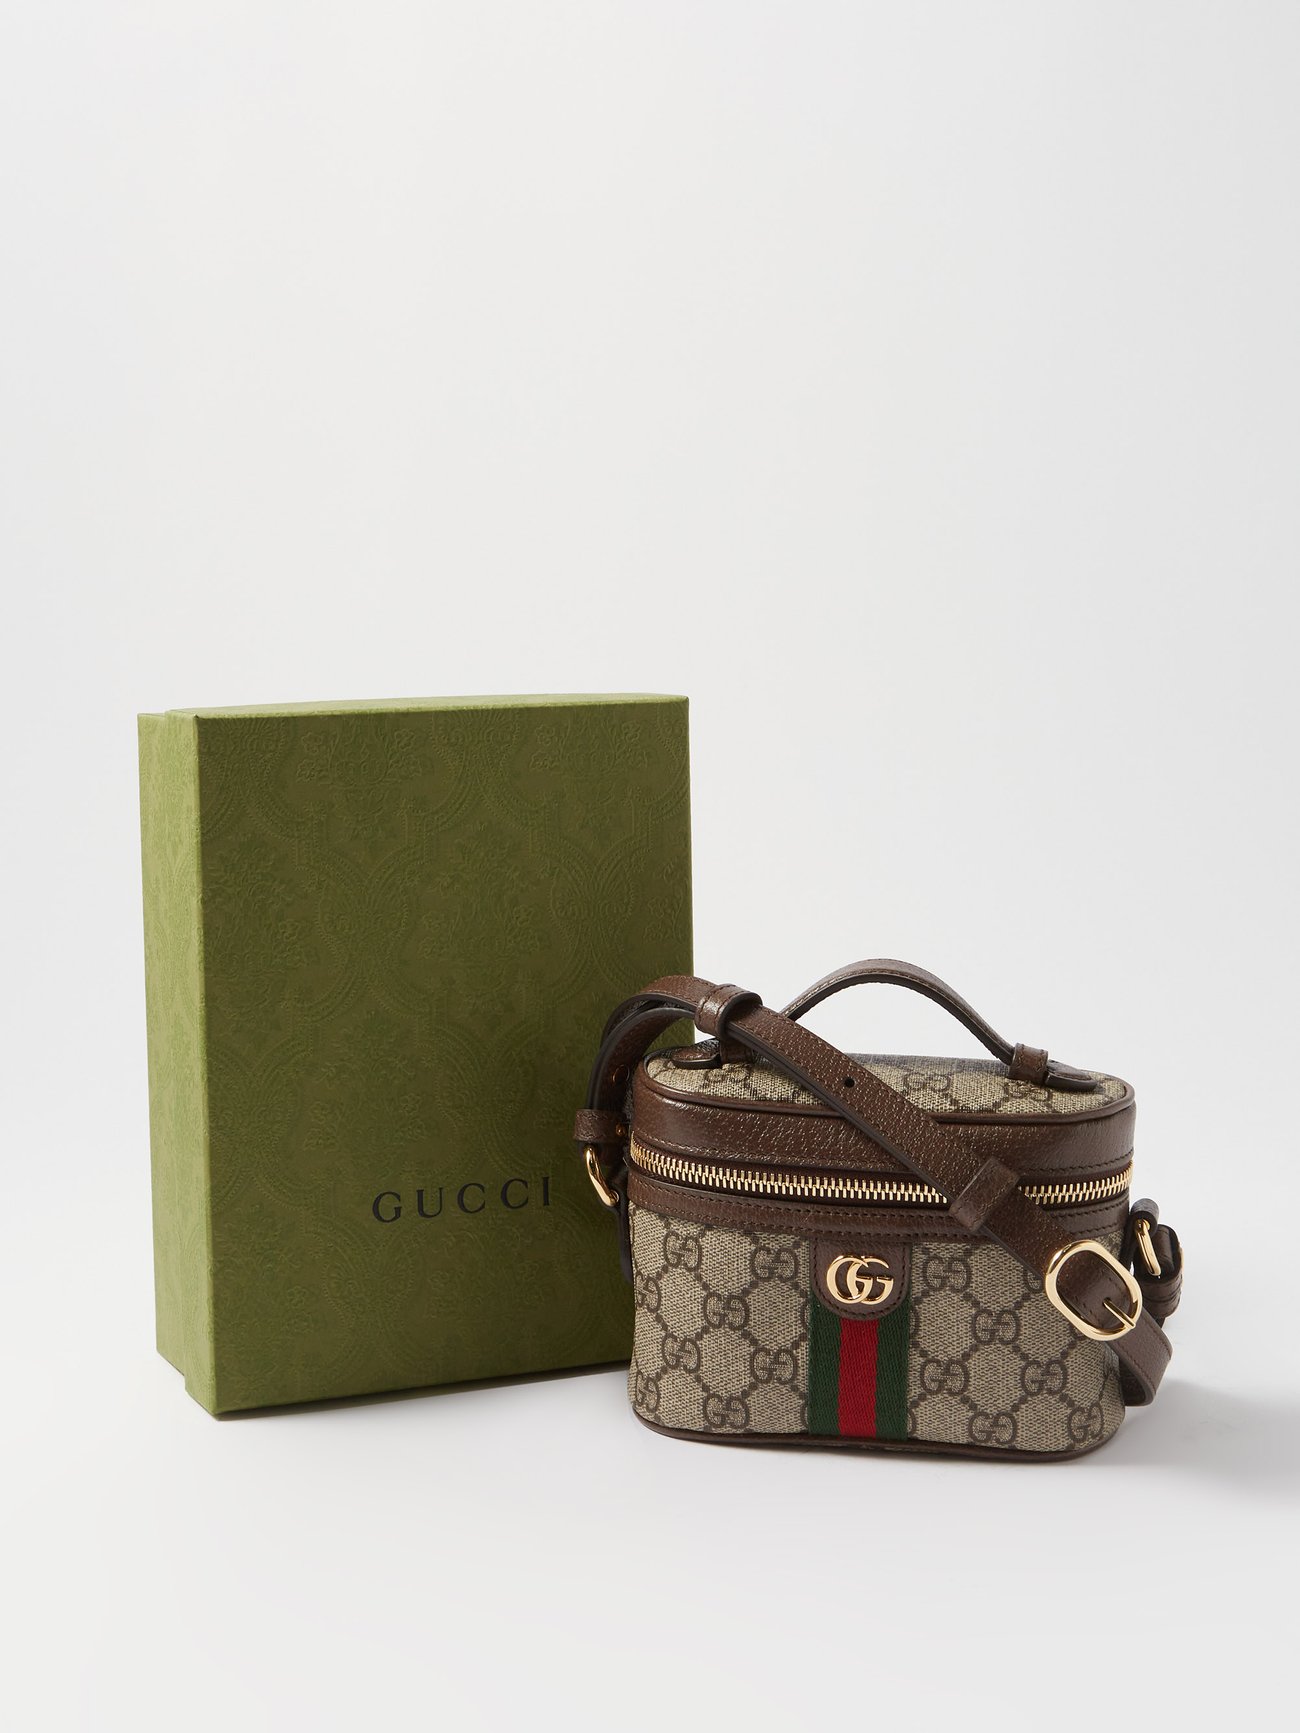 Gucci GG Supreme Ophidia Cosmetic Bag - dress. Raleigh